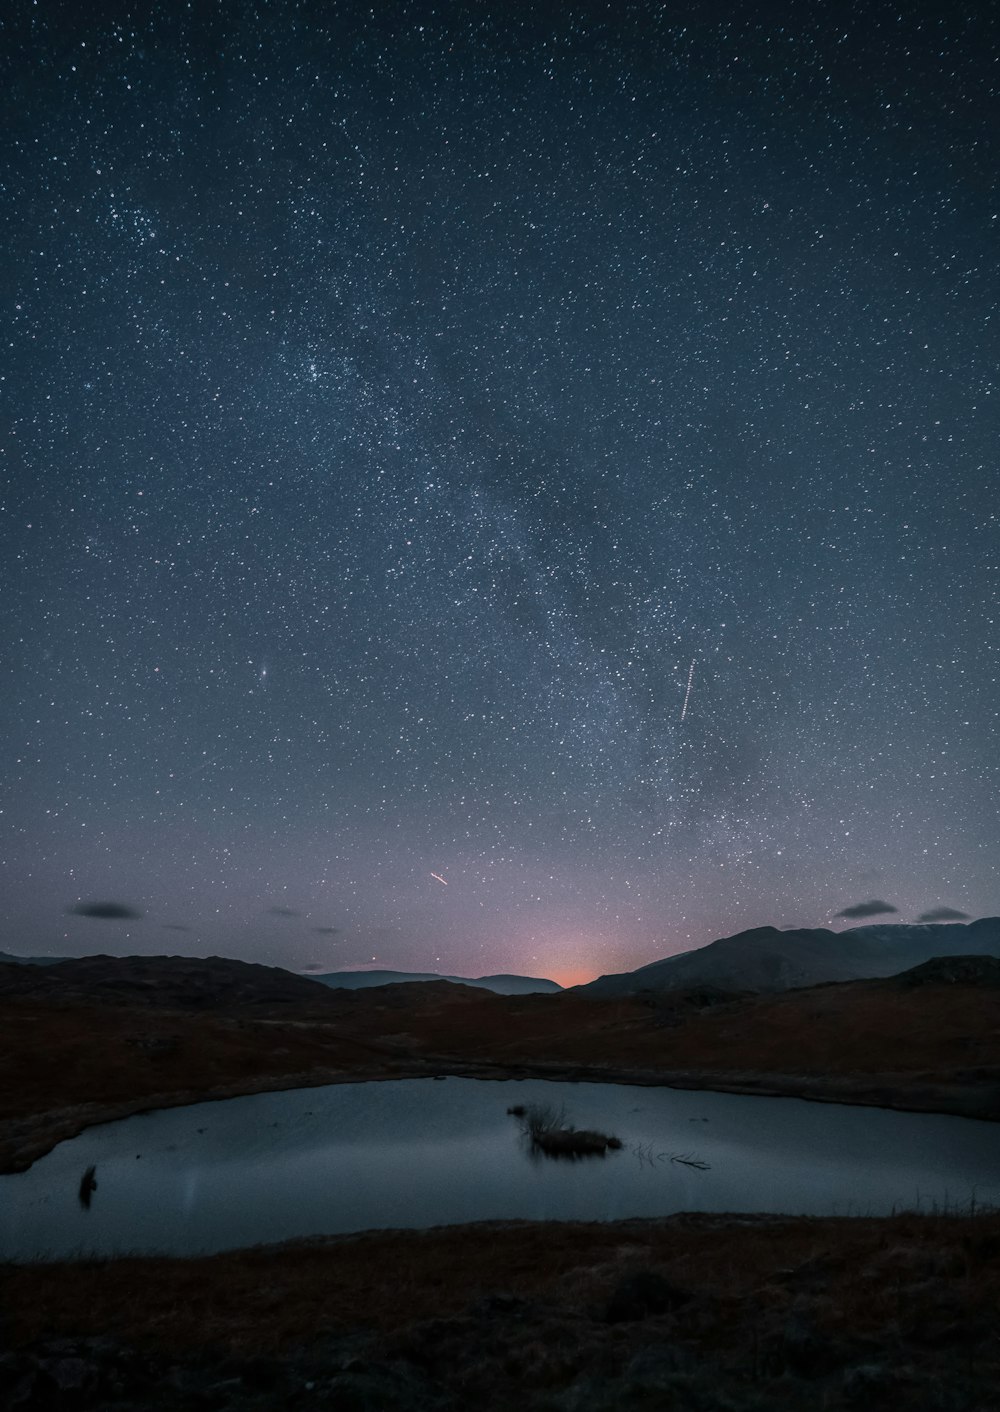 a body of water with a mountain in the night sky